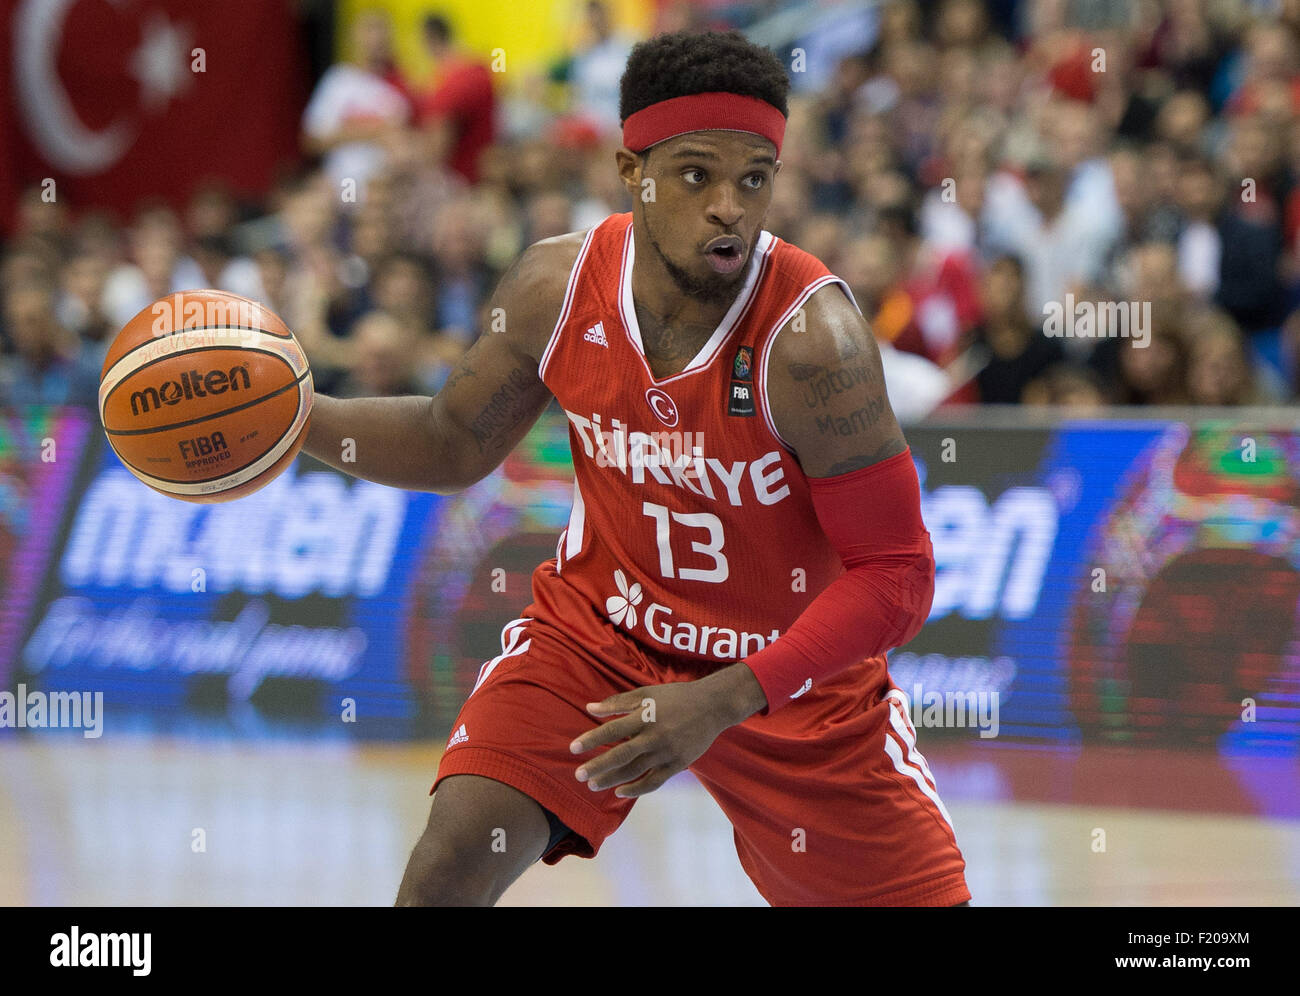 Berlin, Germany. 08th Sep, 2015. Turkey's Ali Muhammed dribbles the ball during the FIBA EuroBasket 2015 Group B match between Germany and Turkey, at the Mercedes-Benz-Arena in Berlin, Germany, 08 September 2015. Germany lost 75:80. Photo: Lukas Schulze/dpa/Alamy Live News Stock Photo